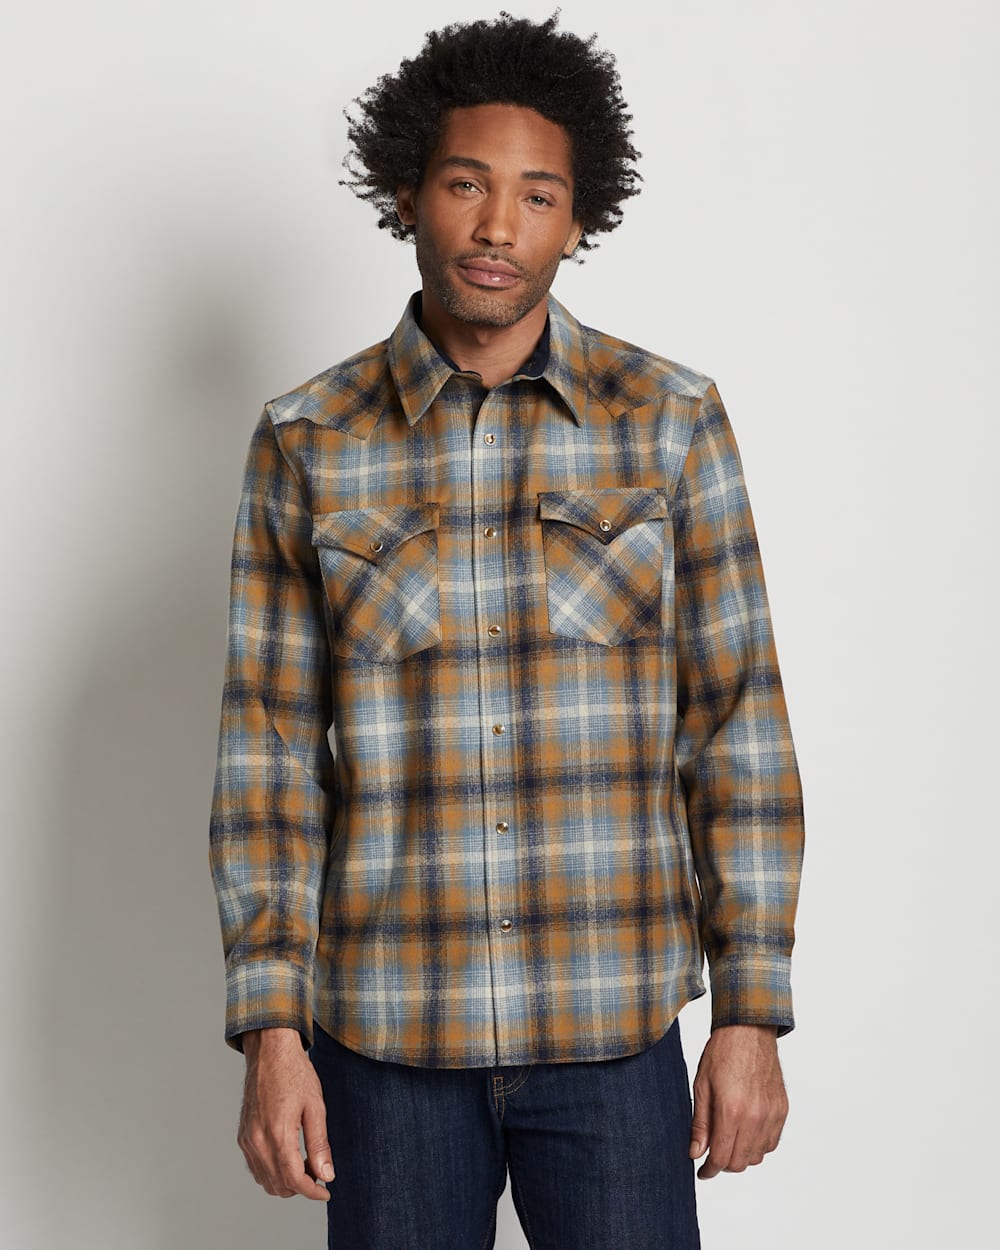 ALTERNATE VIEW OF MEN'S PLAID SNAP-FRONT WESTERN CANYON SHIRT IN BLUE/COPPER OMBRE image number 7